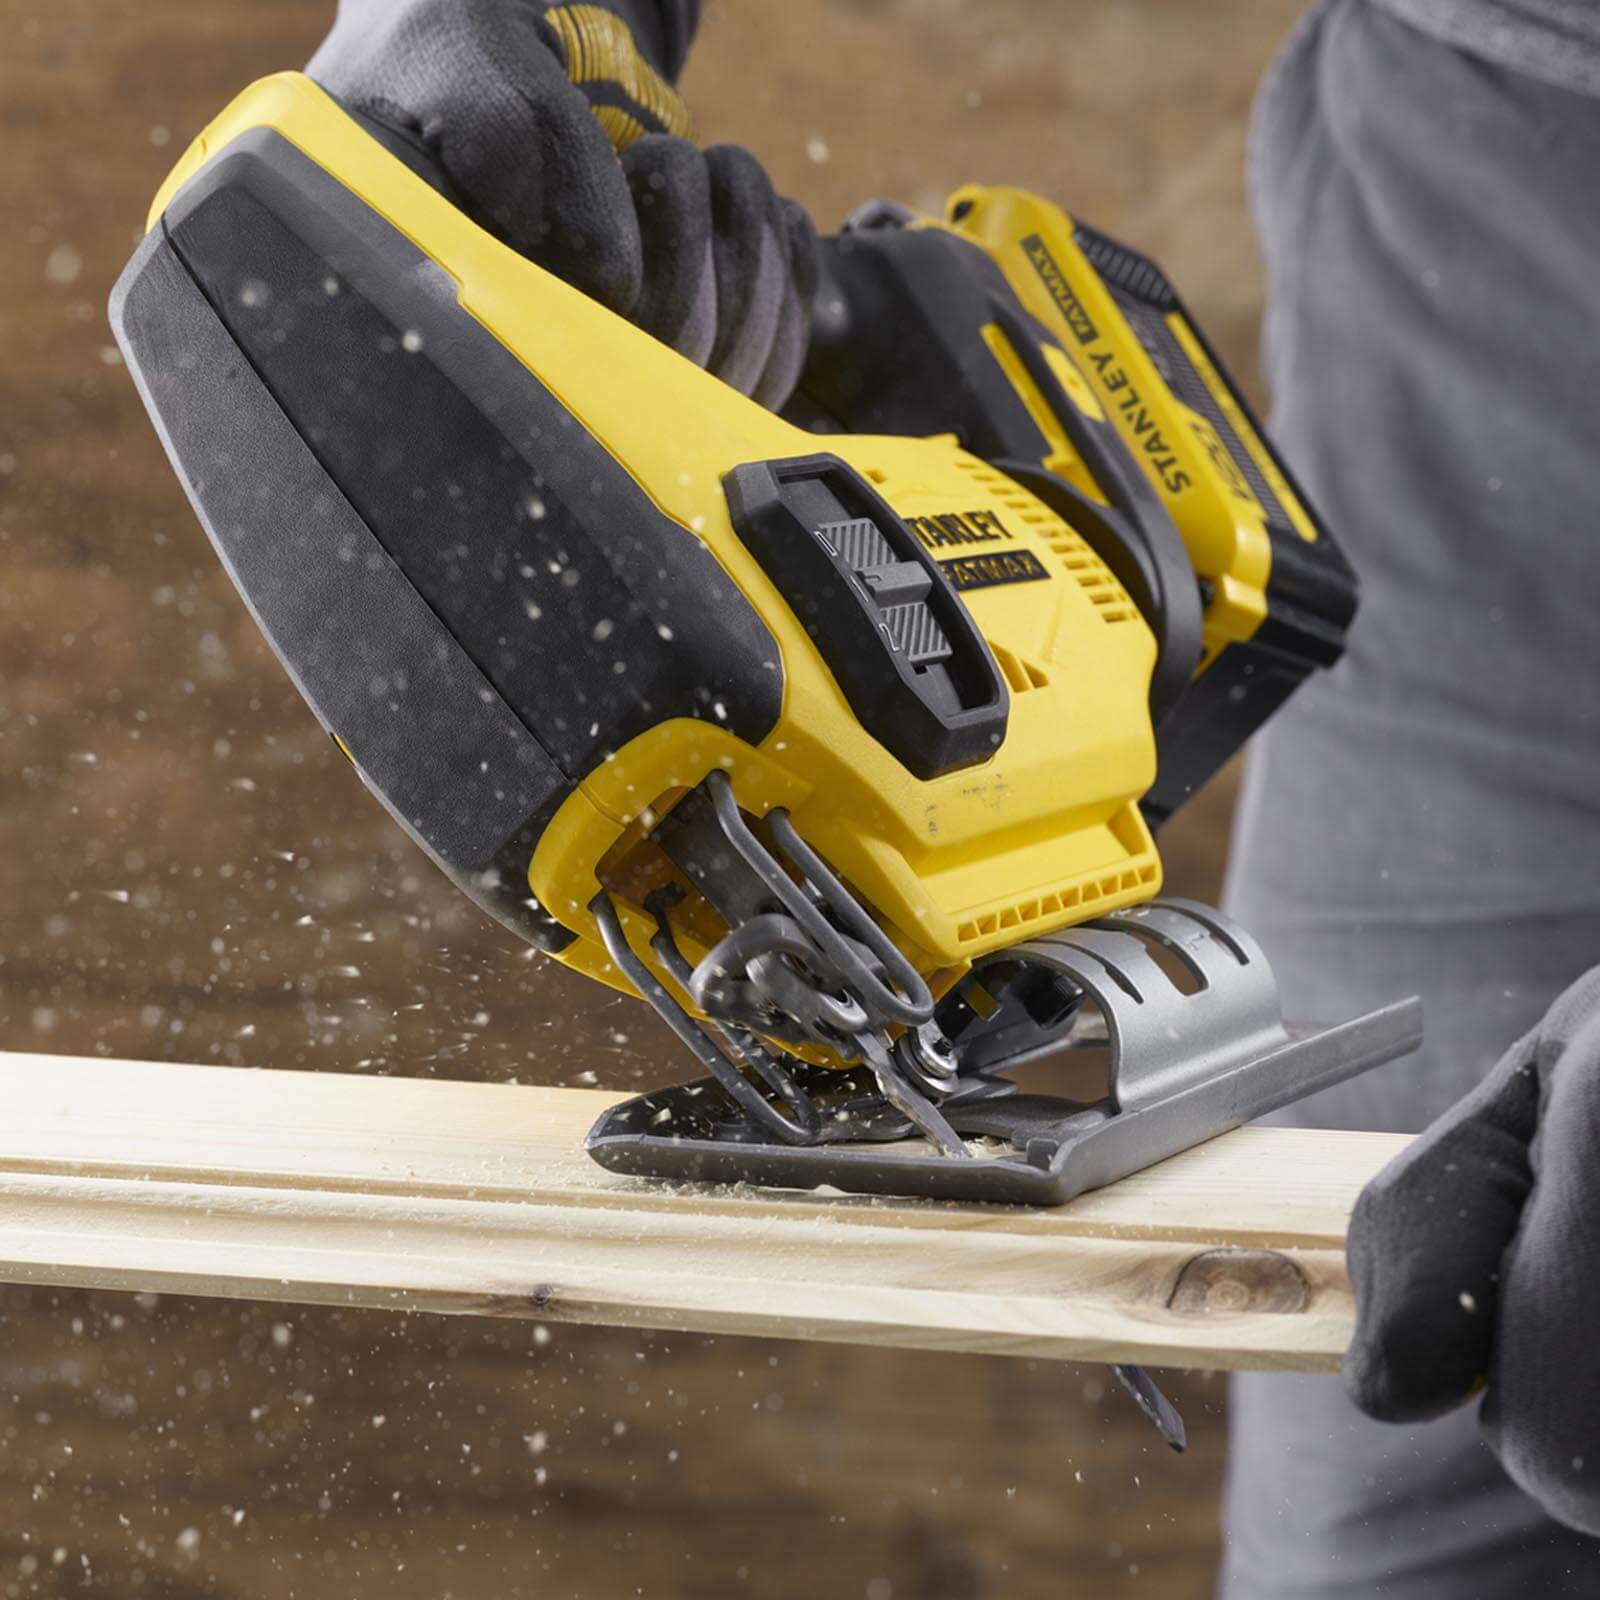 STANLEY FATMAX V20 18V Cordless Jigsaw with Blade and Kit Box (SFMCS600D1K-GB)